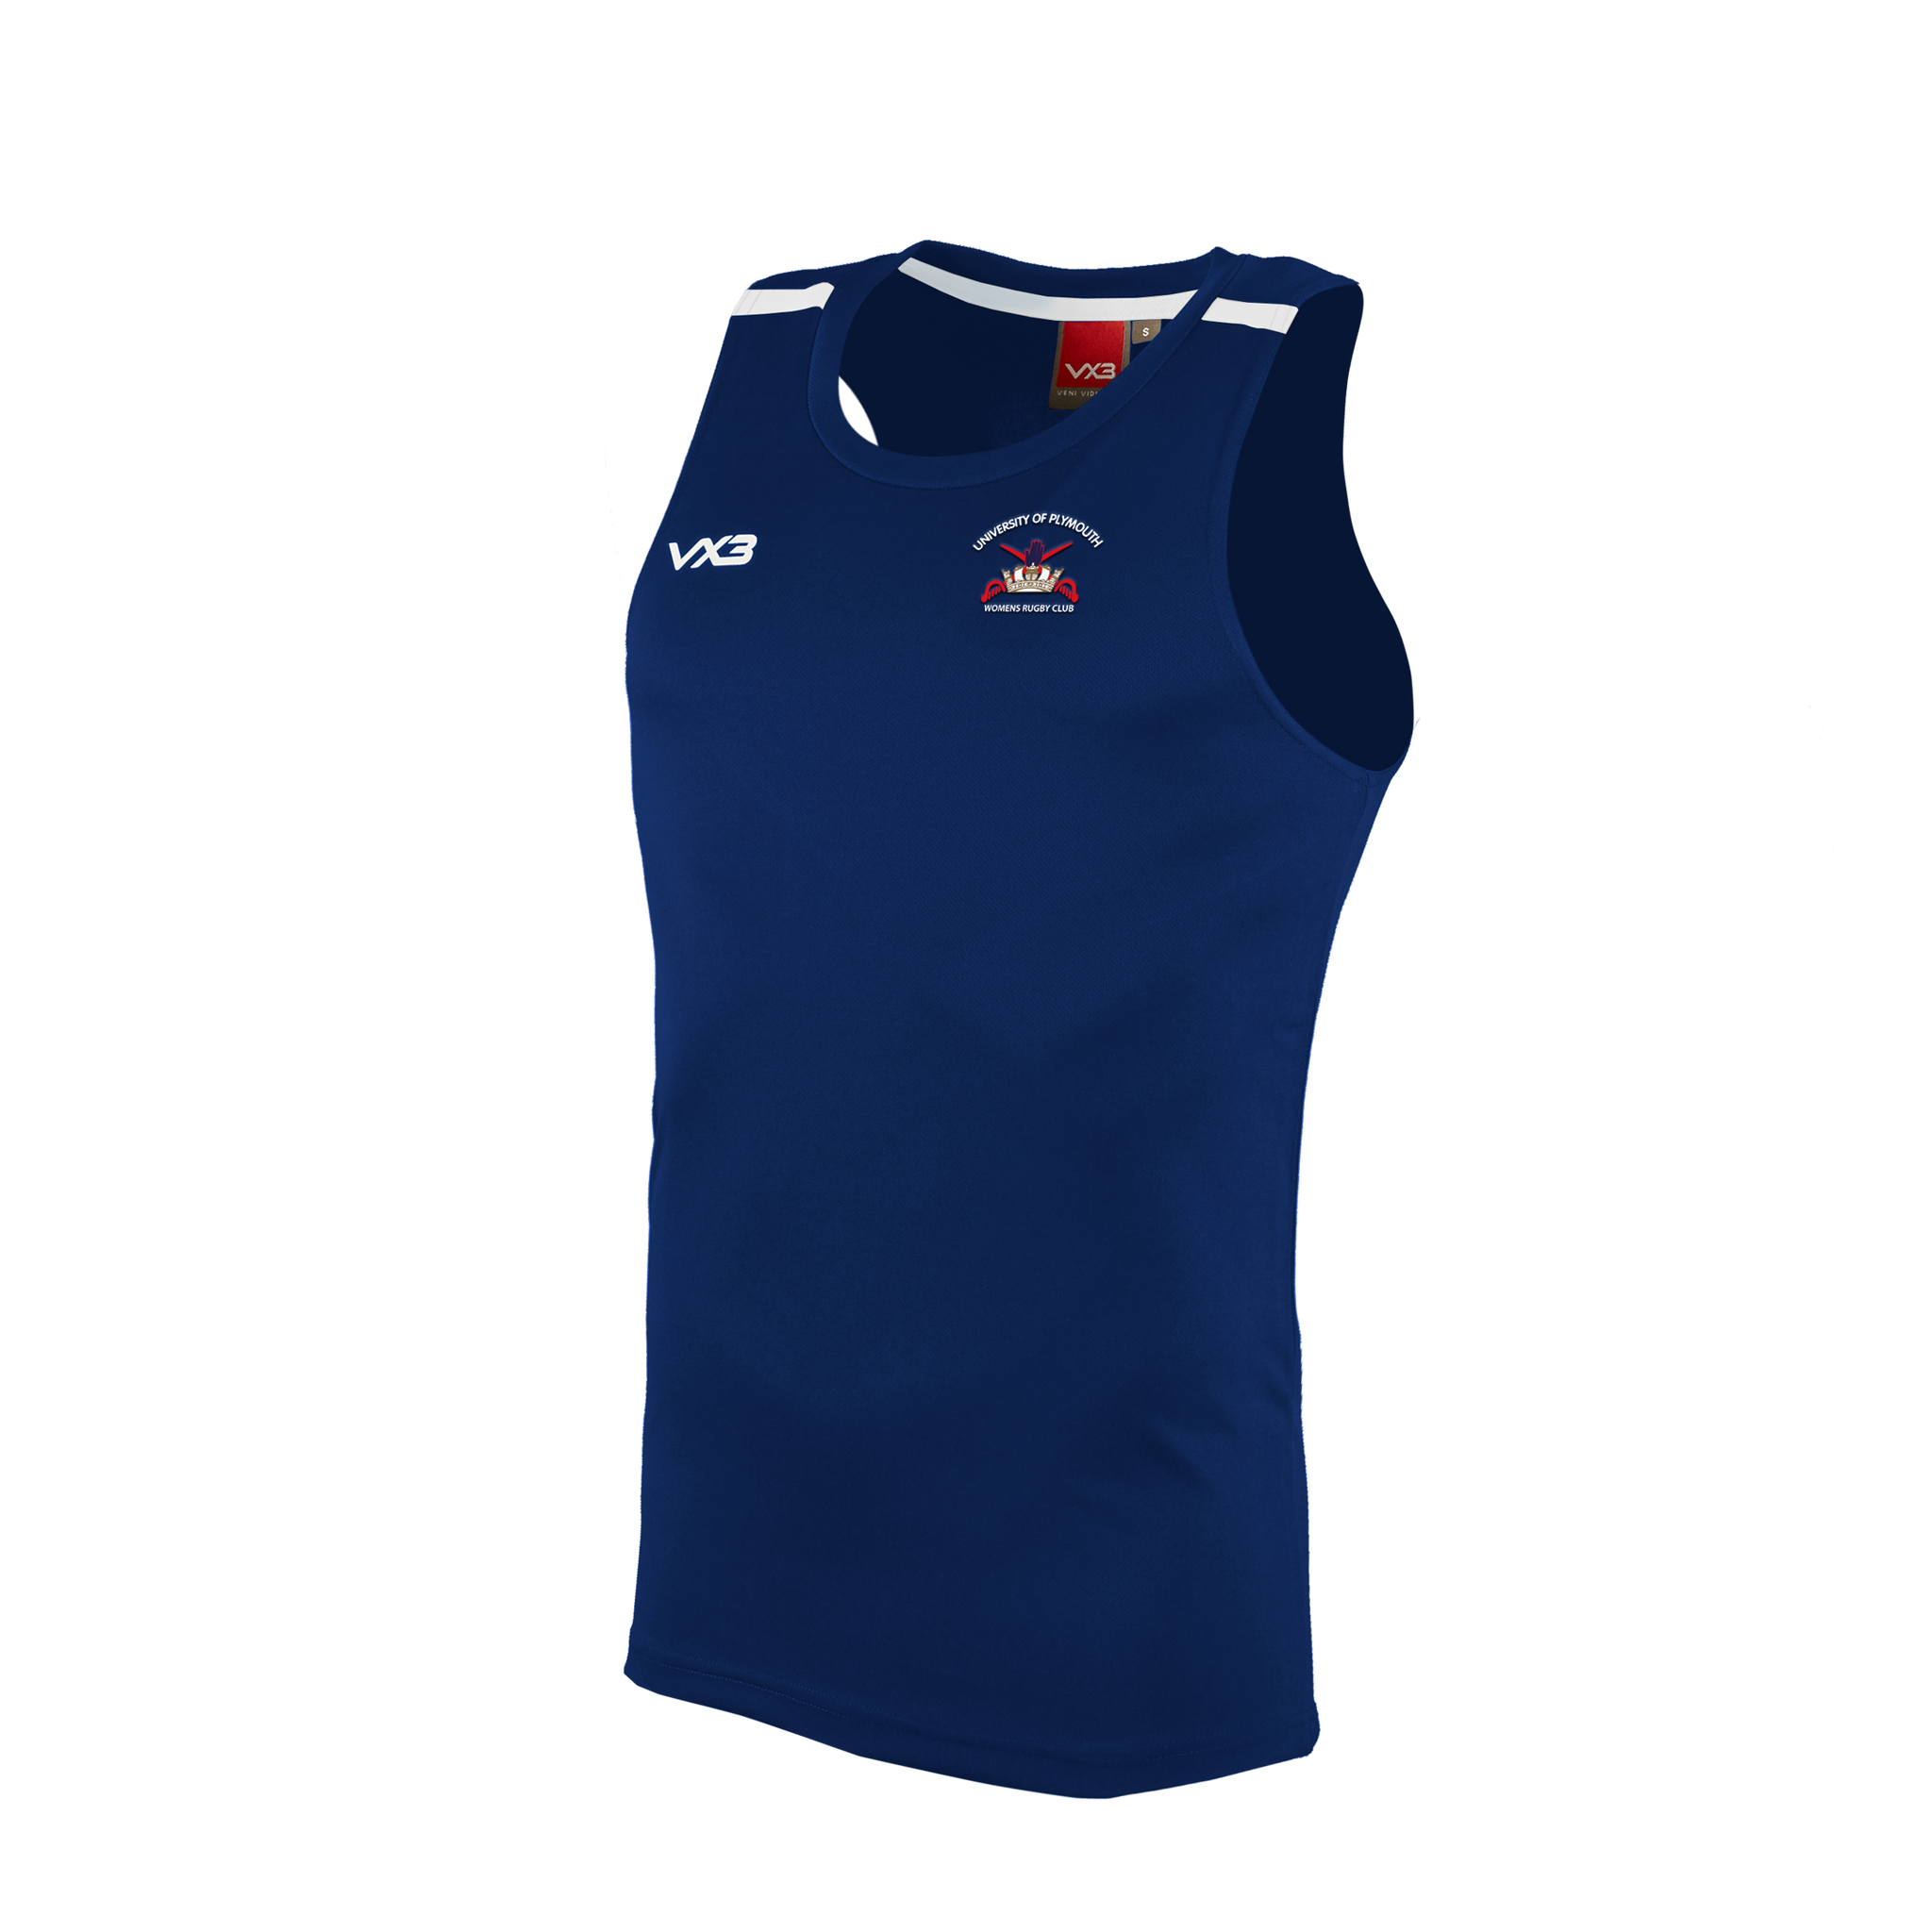 Plymouth University Women's Rugby Fortis Vest